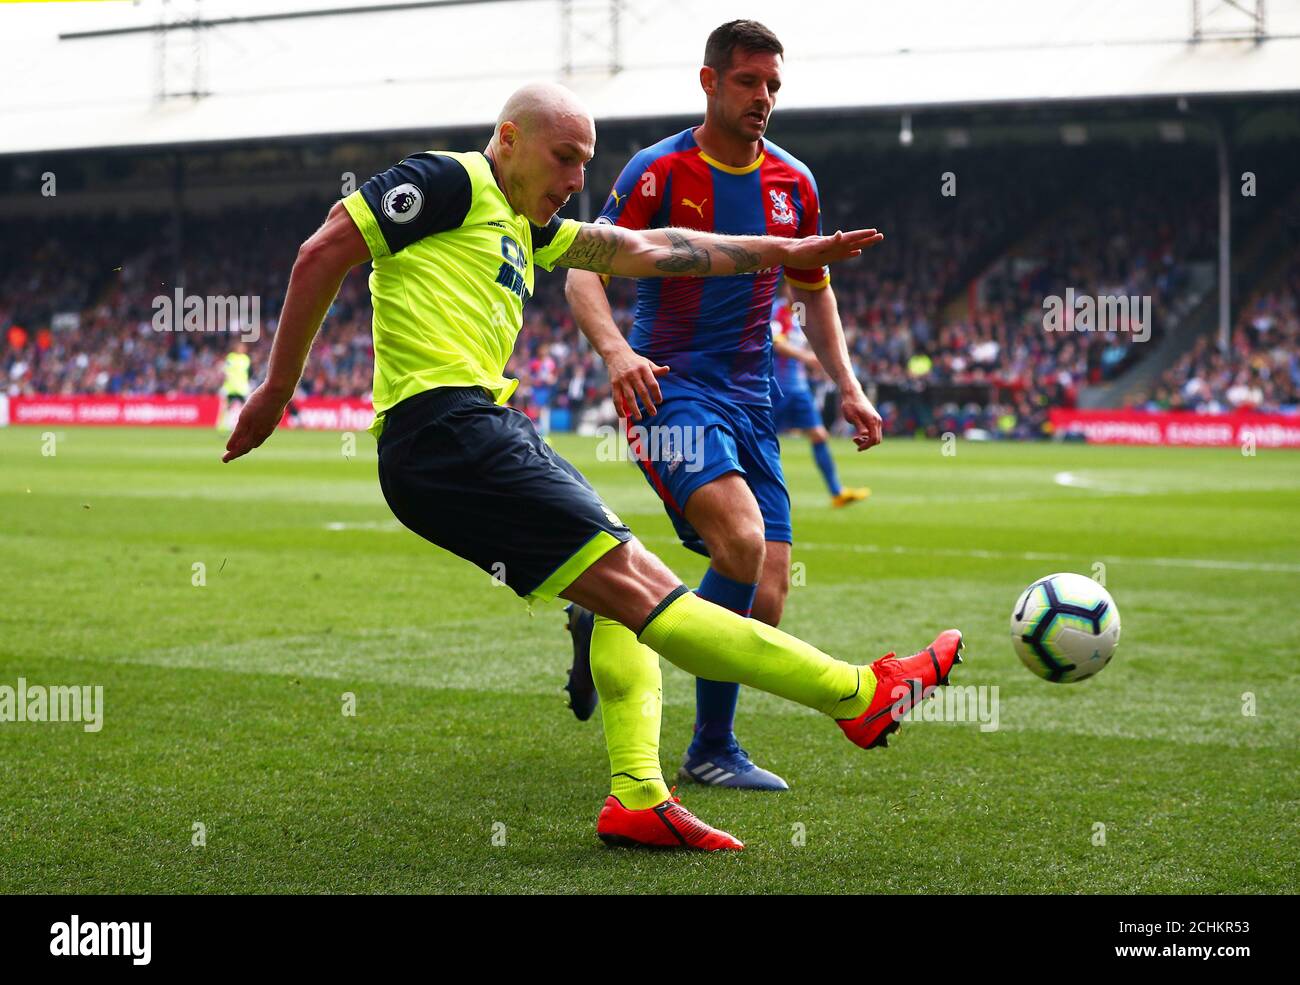 Soccer Football - Premier League - Crystal Palace v Huddersfield Town - Selhurst Park, London, Britain - March 30, 2019  Huddersfield Town's Aaron Mooy in action   REUTERS/Hannah McKay  EDITORIAL USE ONLY. No use with unauthorized audio, video, data, fixture lists, club/league logos or "live" services. Online in-match use limited to 75 images, no video emulation. No use in betting, games or single club/league/player publications.  Please contact your account representative for further details. Stock Photo